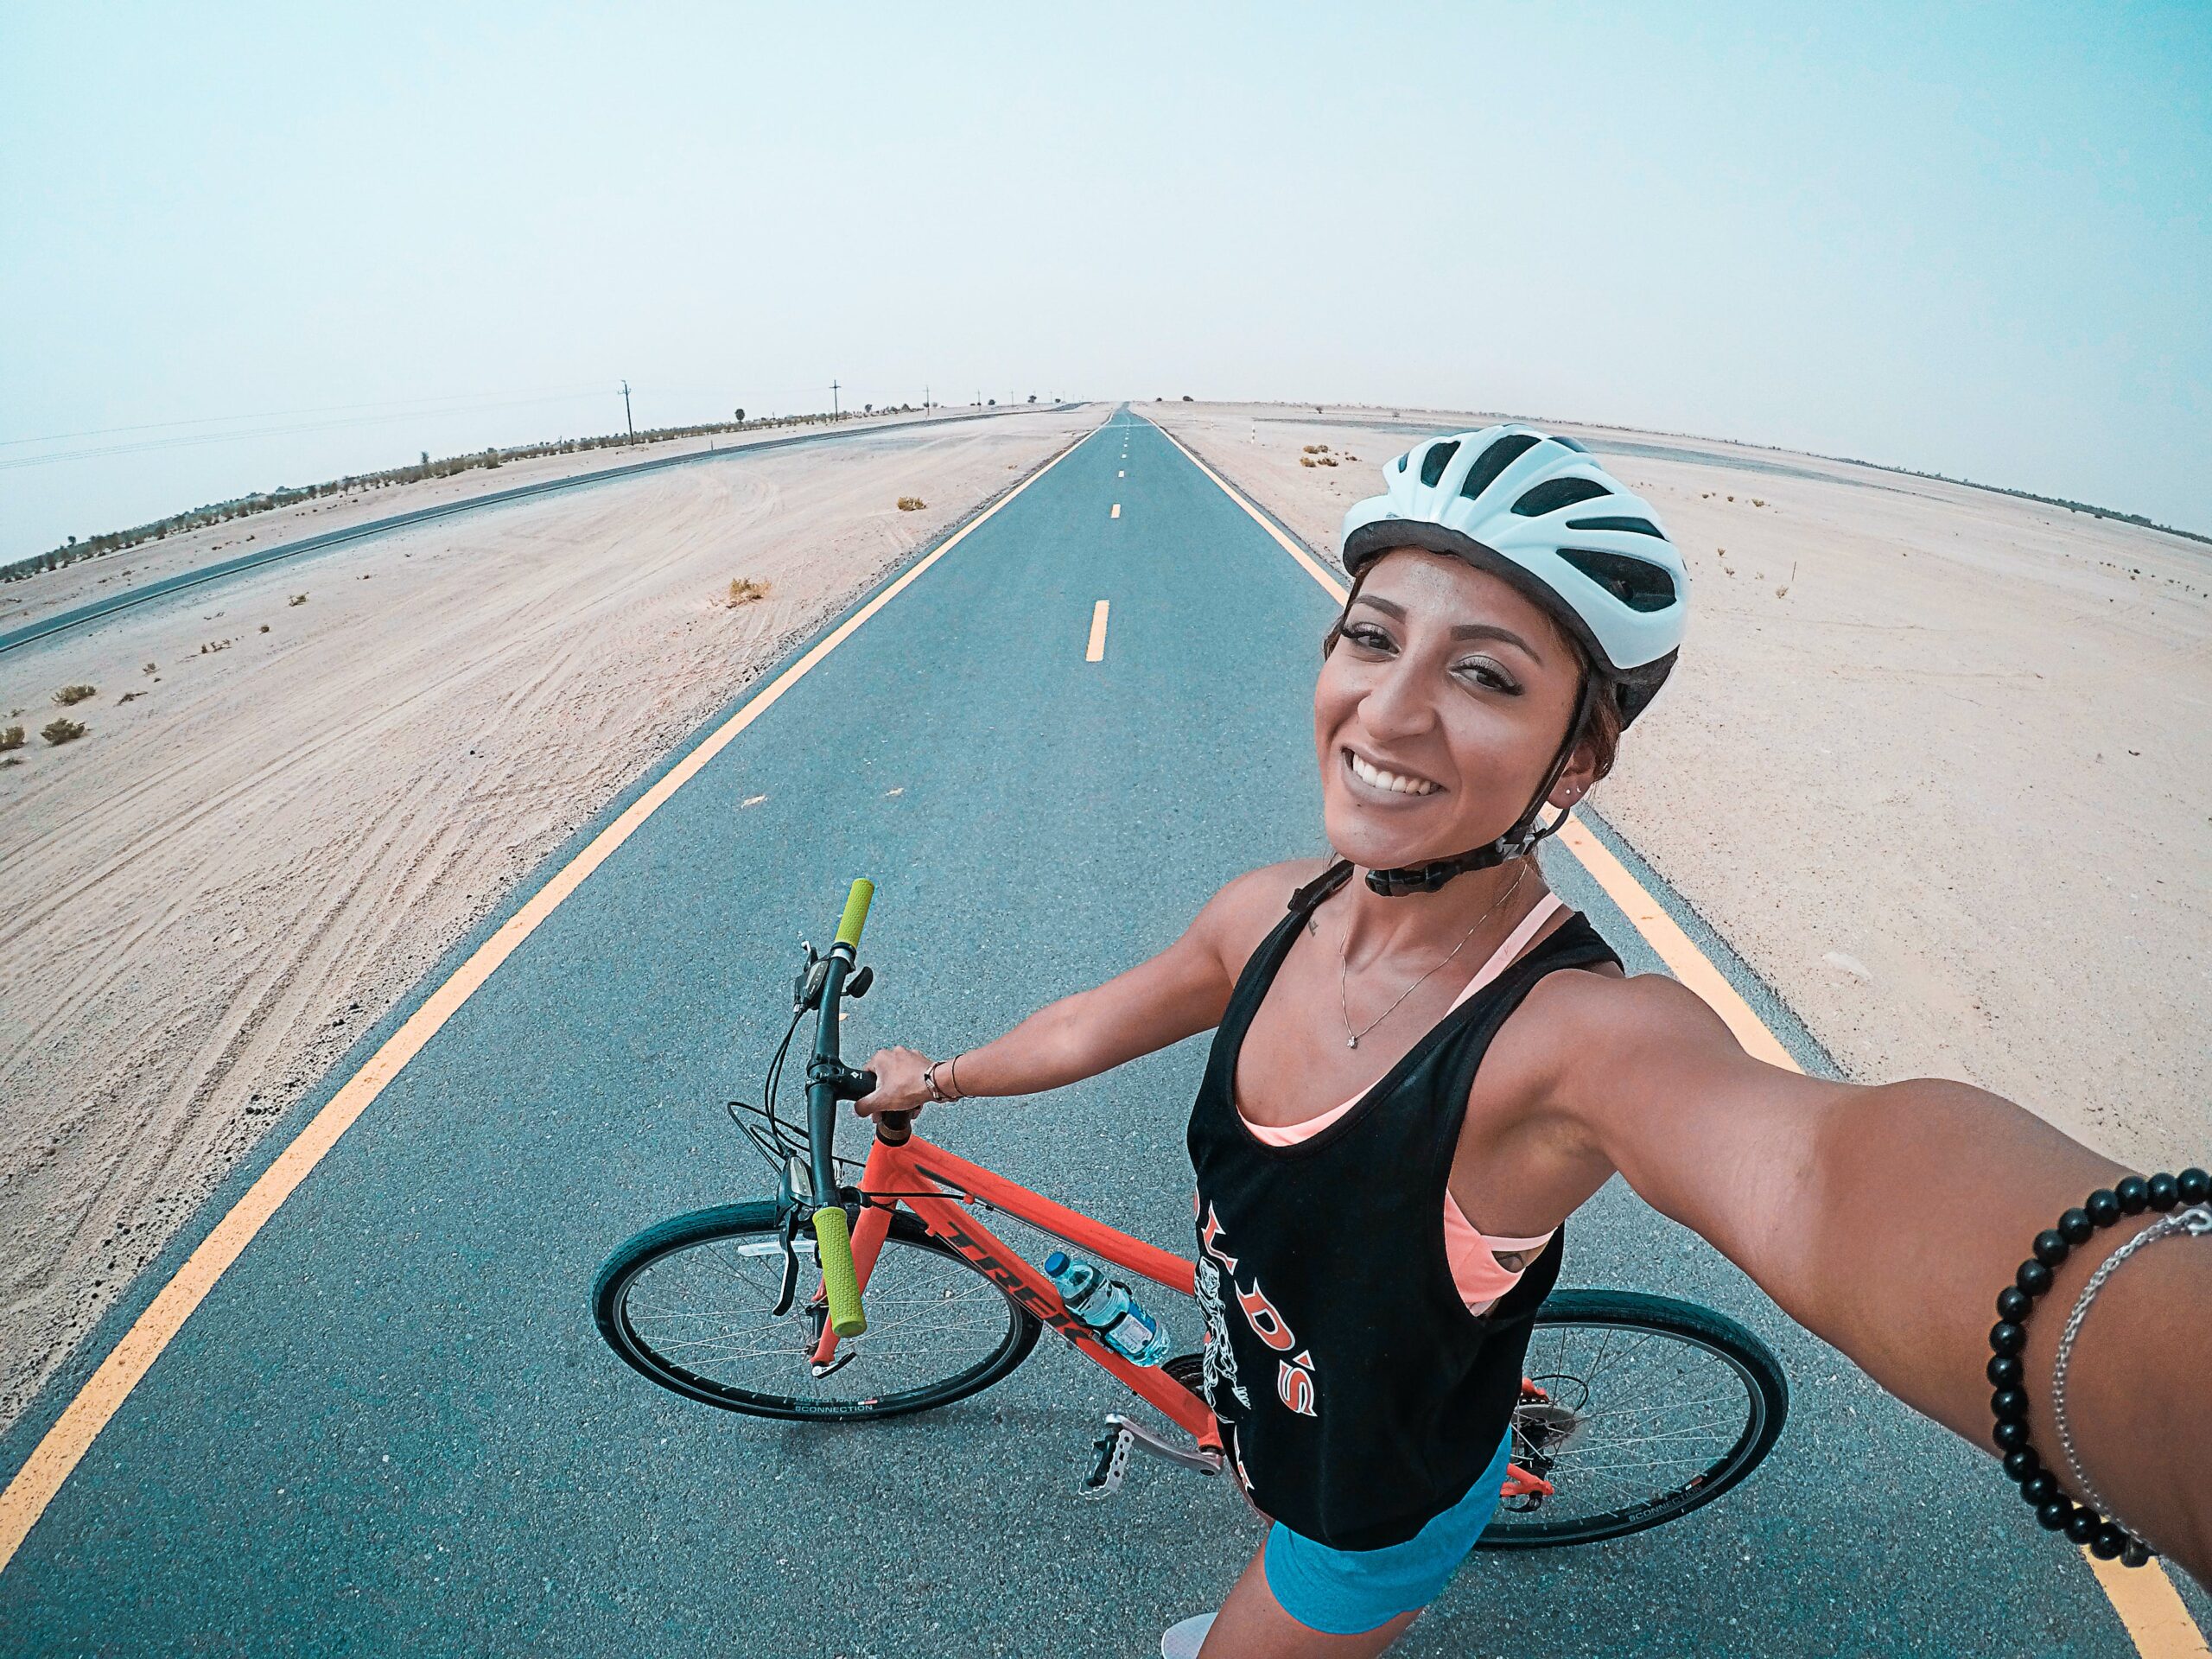 A happy cyclist takes a selfie on an empty desert road with her red bicycle, wearing a helmet, tank top, and shorts, with clear skies above.